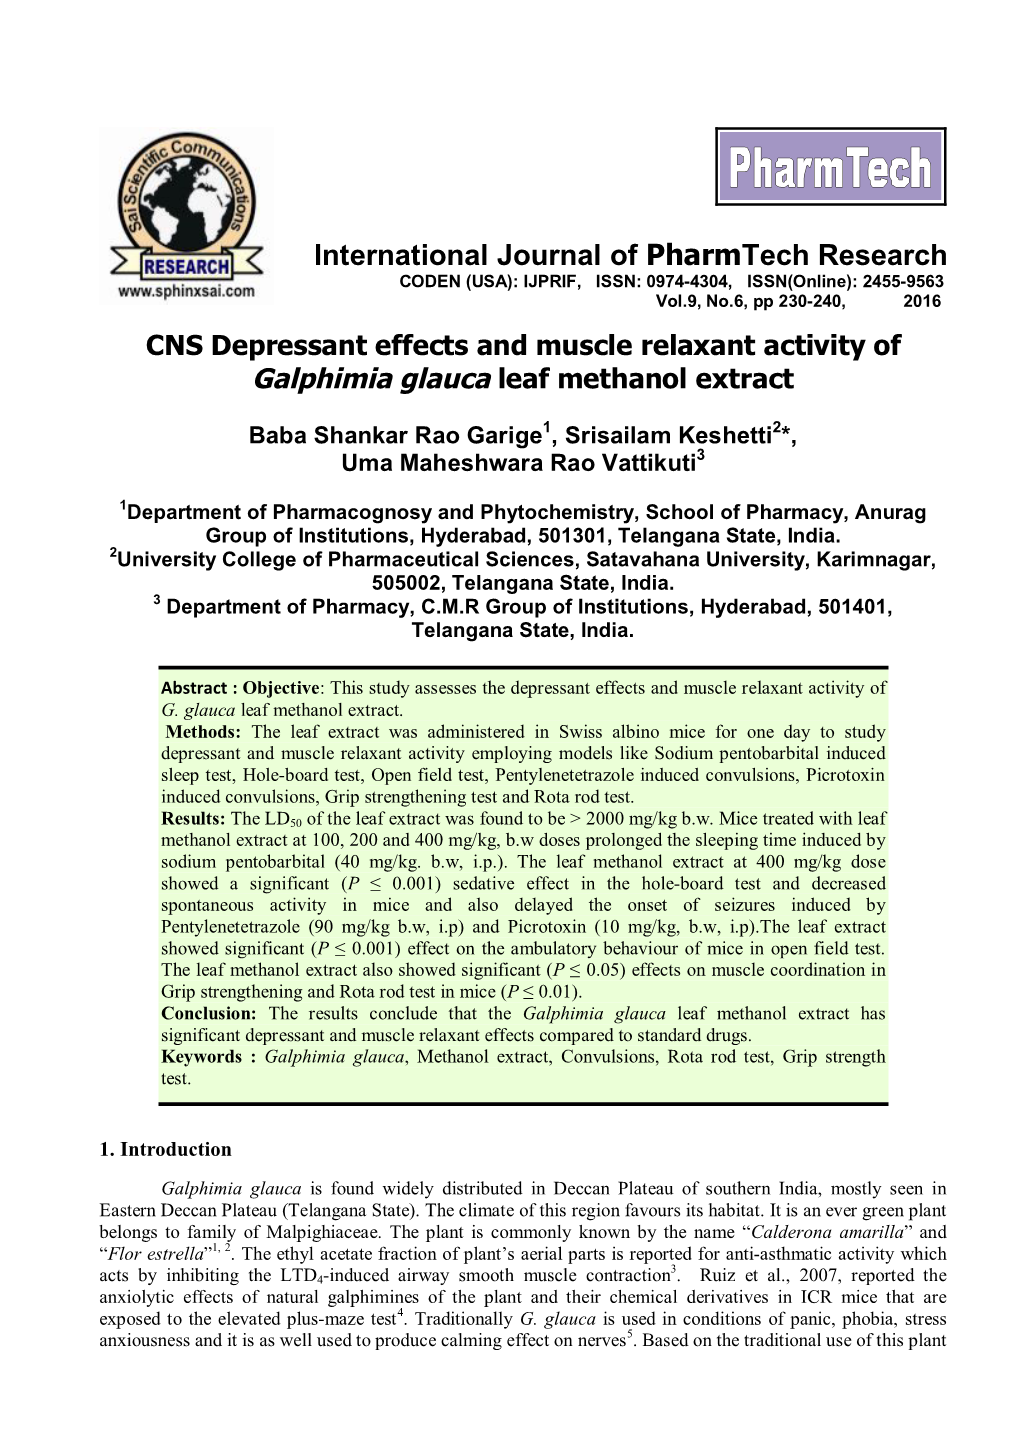 CNS Depressant Effects and Muscle Relaxant Activity of Galphimia Glauca Leaf Methanol Extract